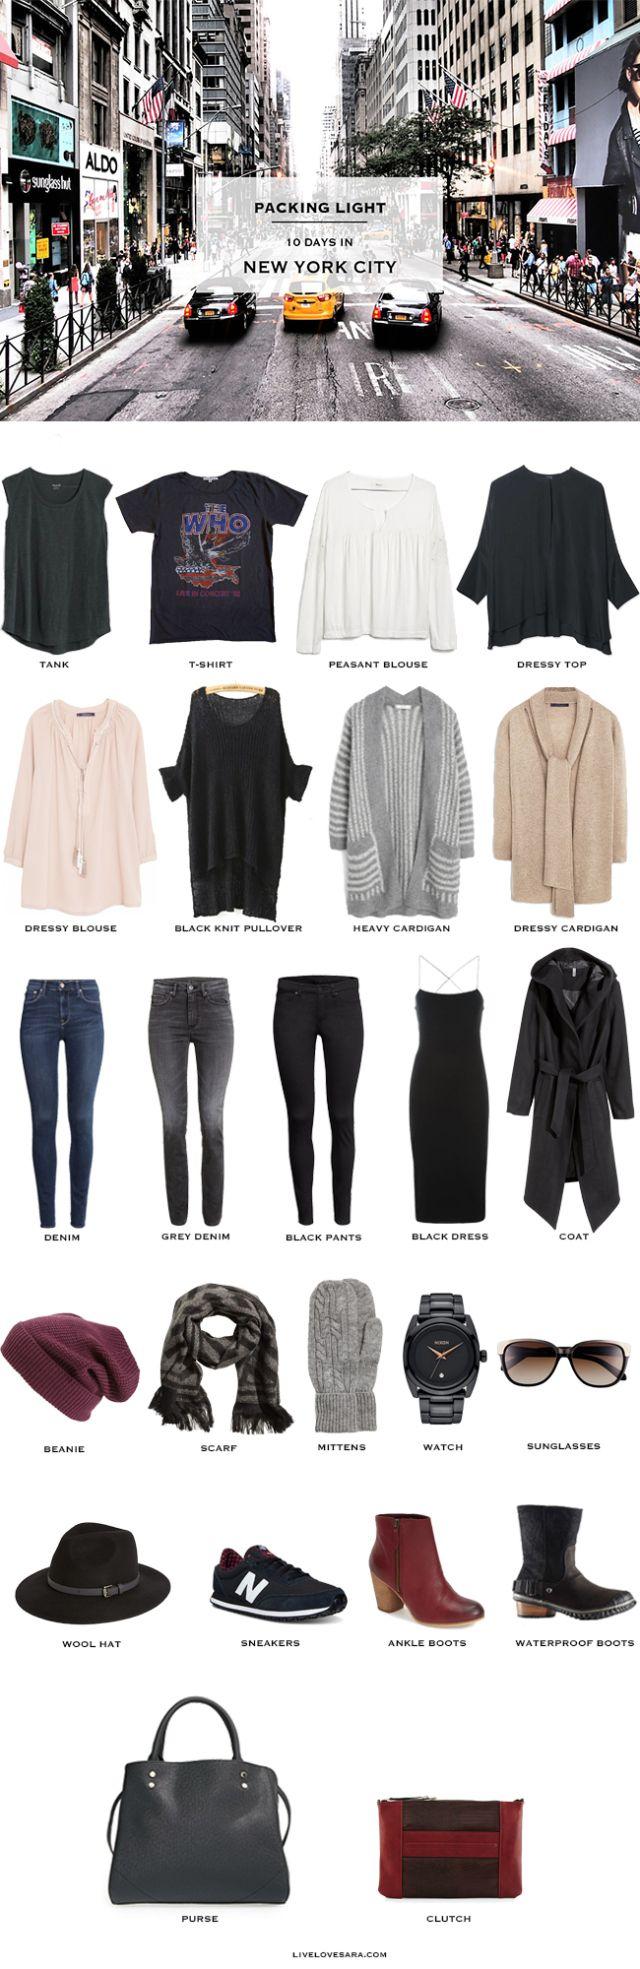 Hochzeit - What To Pack For New York City - Packing Light Winter - Livelovesara